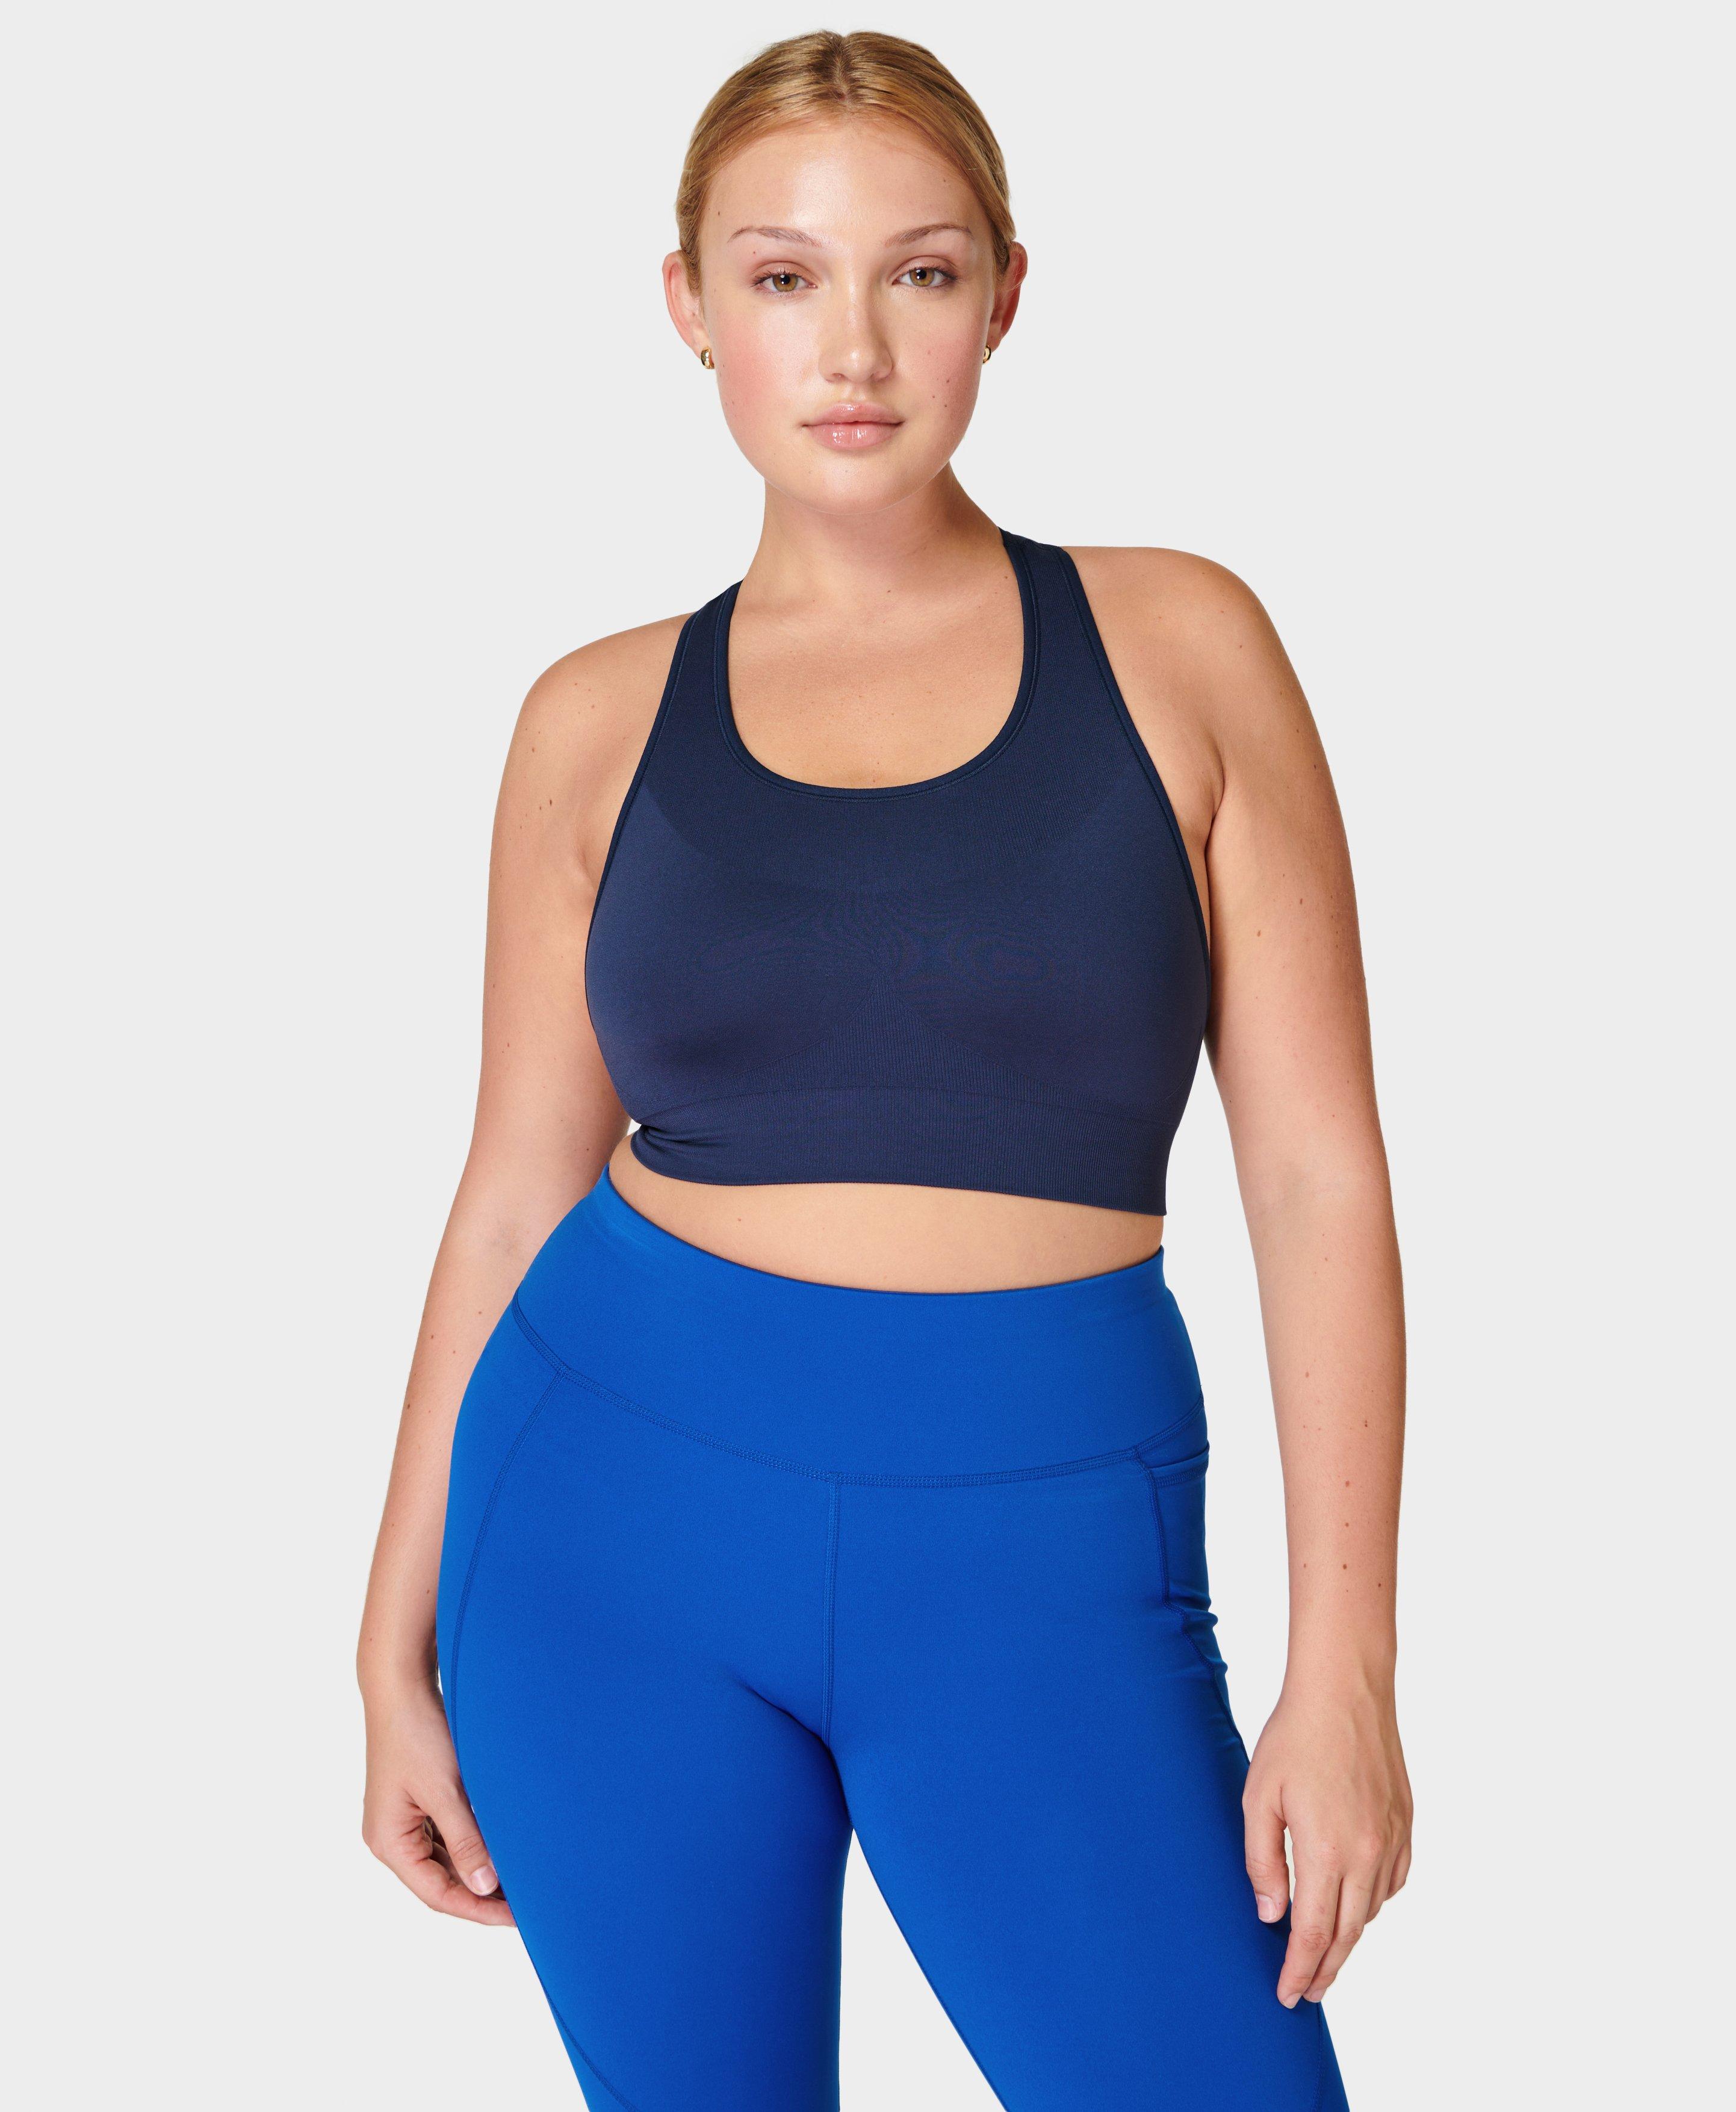 MIRITY Women Racerback Sports Bras - High Impact Workout Gym Activewear Bra  Color Blue Size M, Blue, Medium : Buy Online at Best Price in KSA - Souq is  now : Fashion